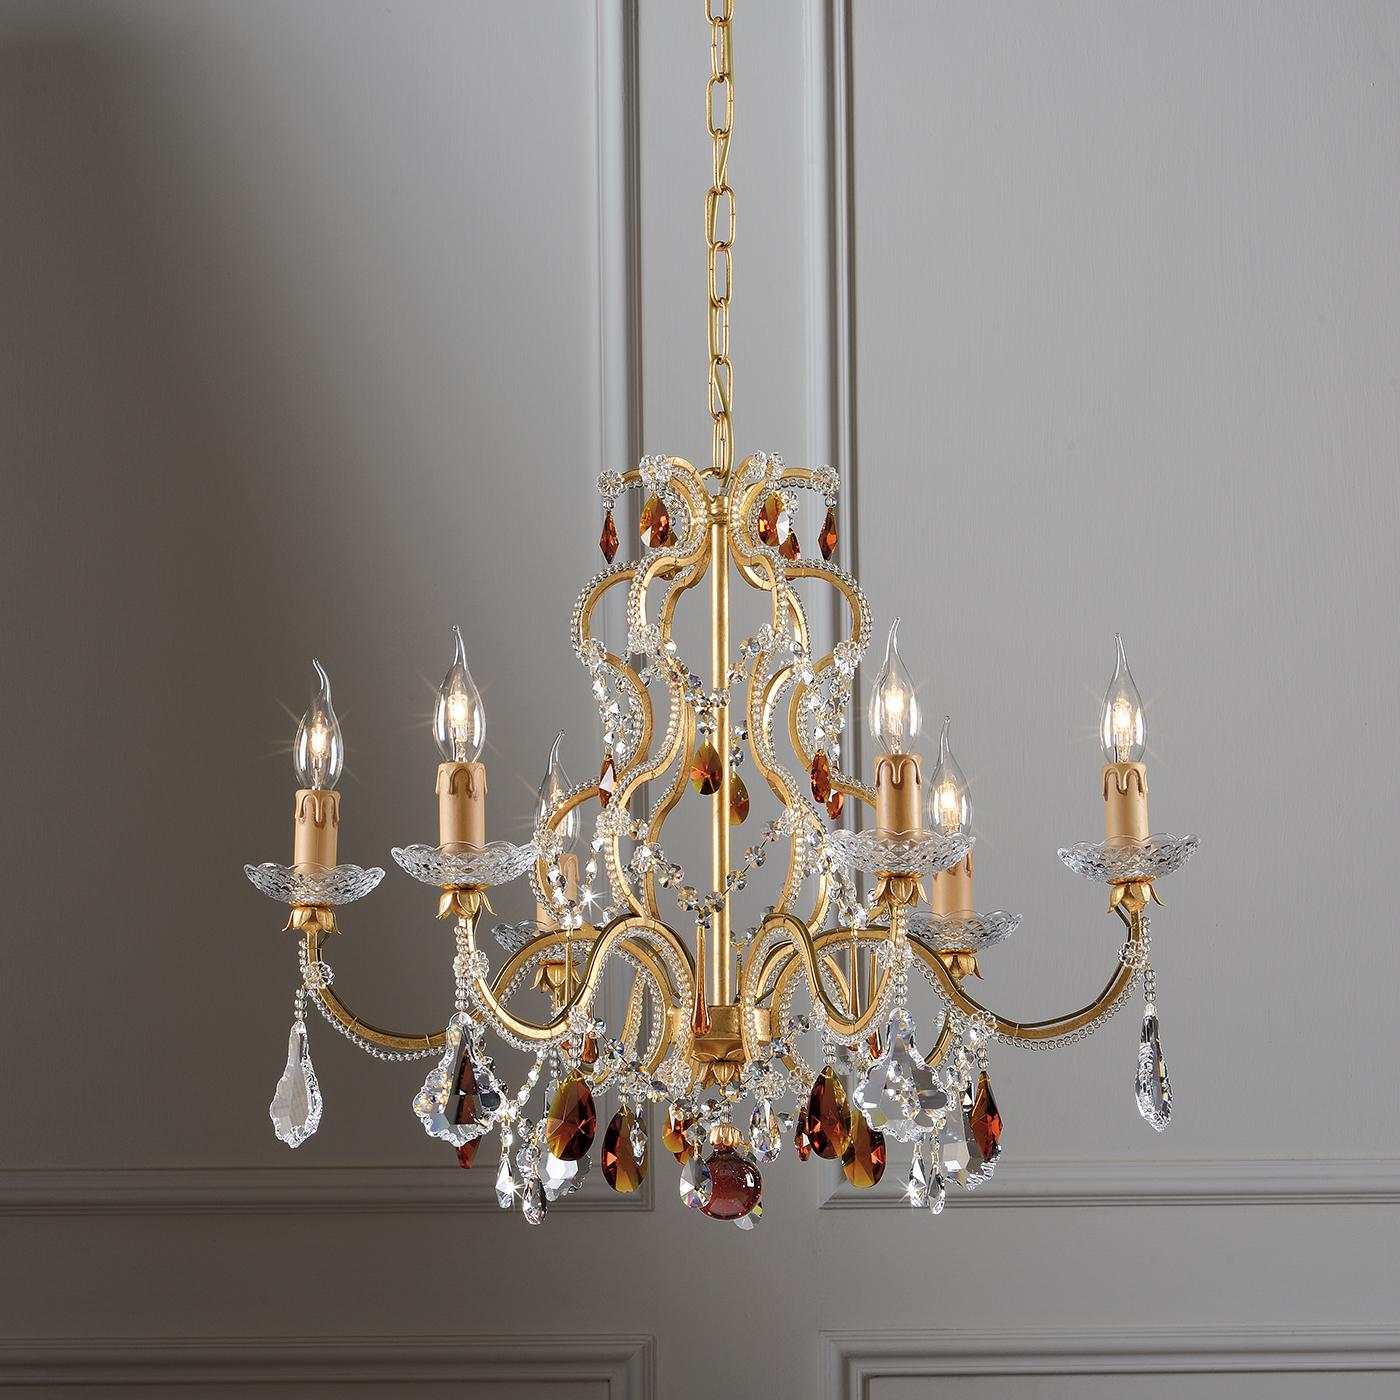 A modern chandelier with traditional inspiration, dripping with transparent and amber crystals. Made in metal with a sumptuous gold leaf finish, the chandelier is inspired by centuries of tradition, with a pared down modern feel, making it the